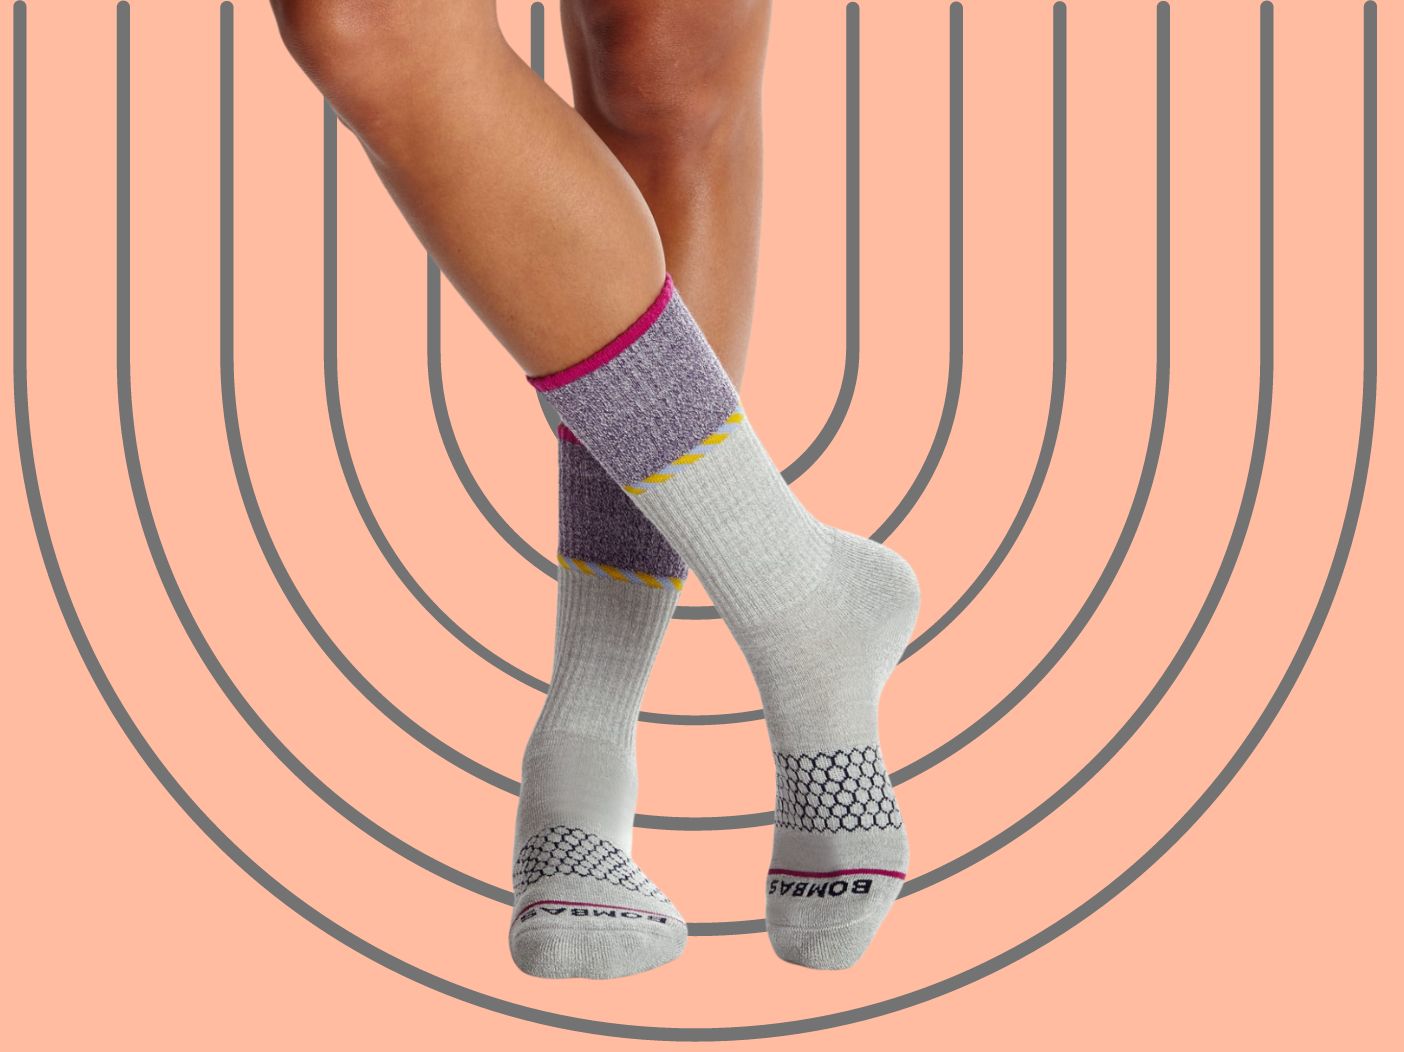 Bombas Socks Review: Are They Worth The Price?